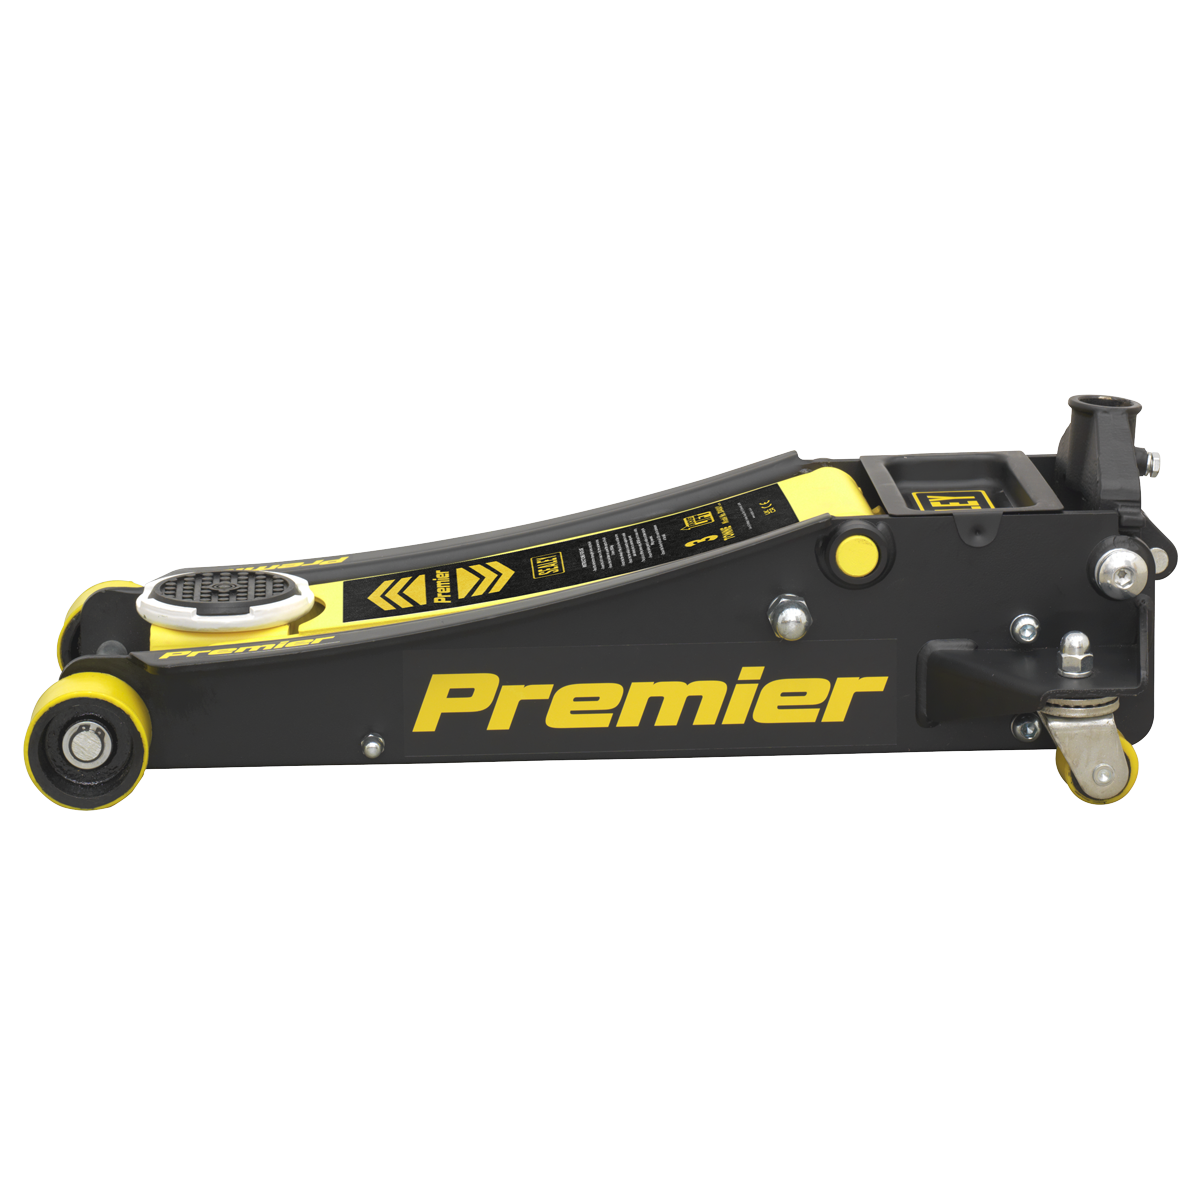 Sealey 3tonne Trolley Jack with Rocket Lift - Yellow 3040AY